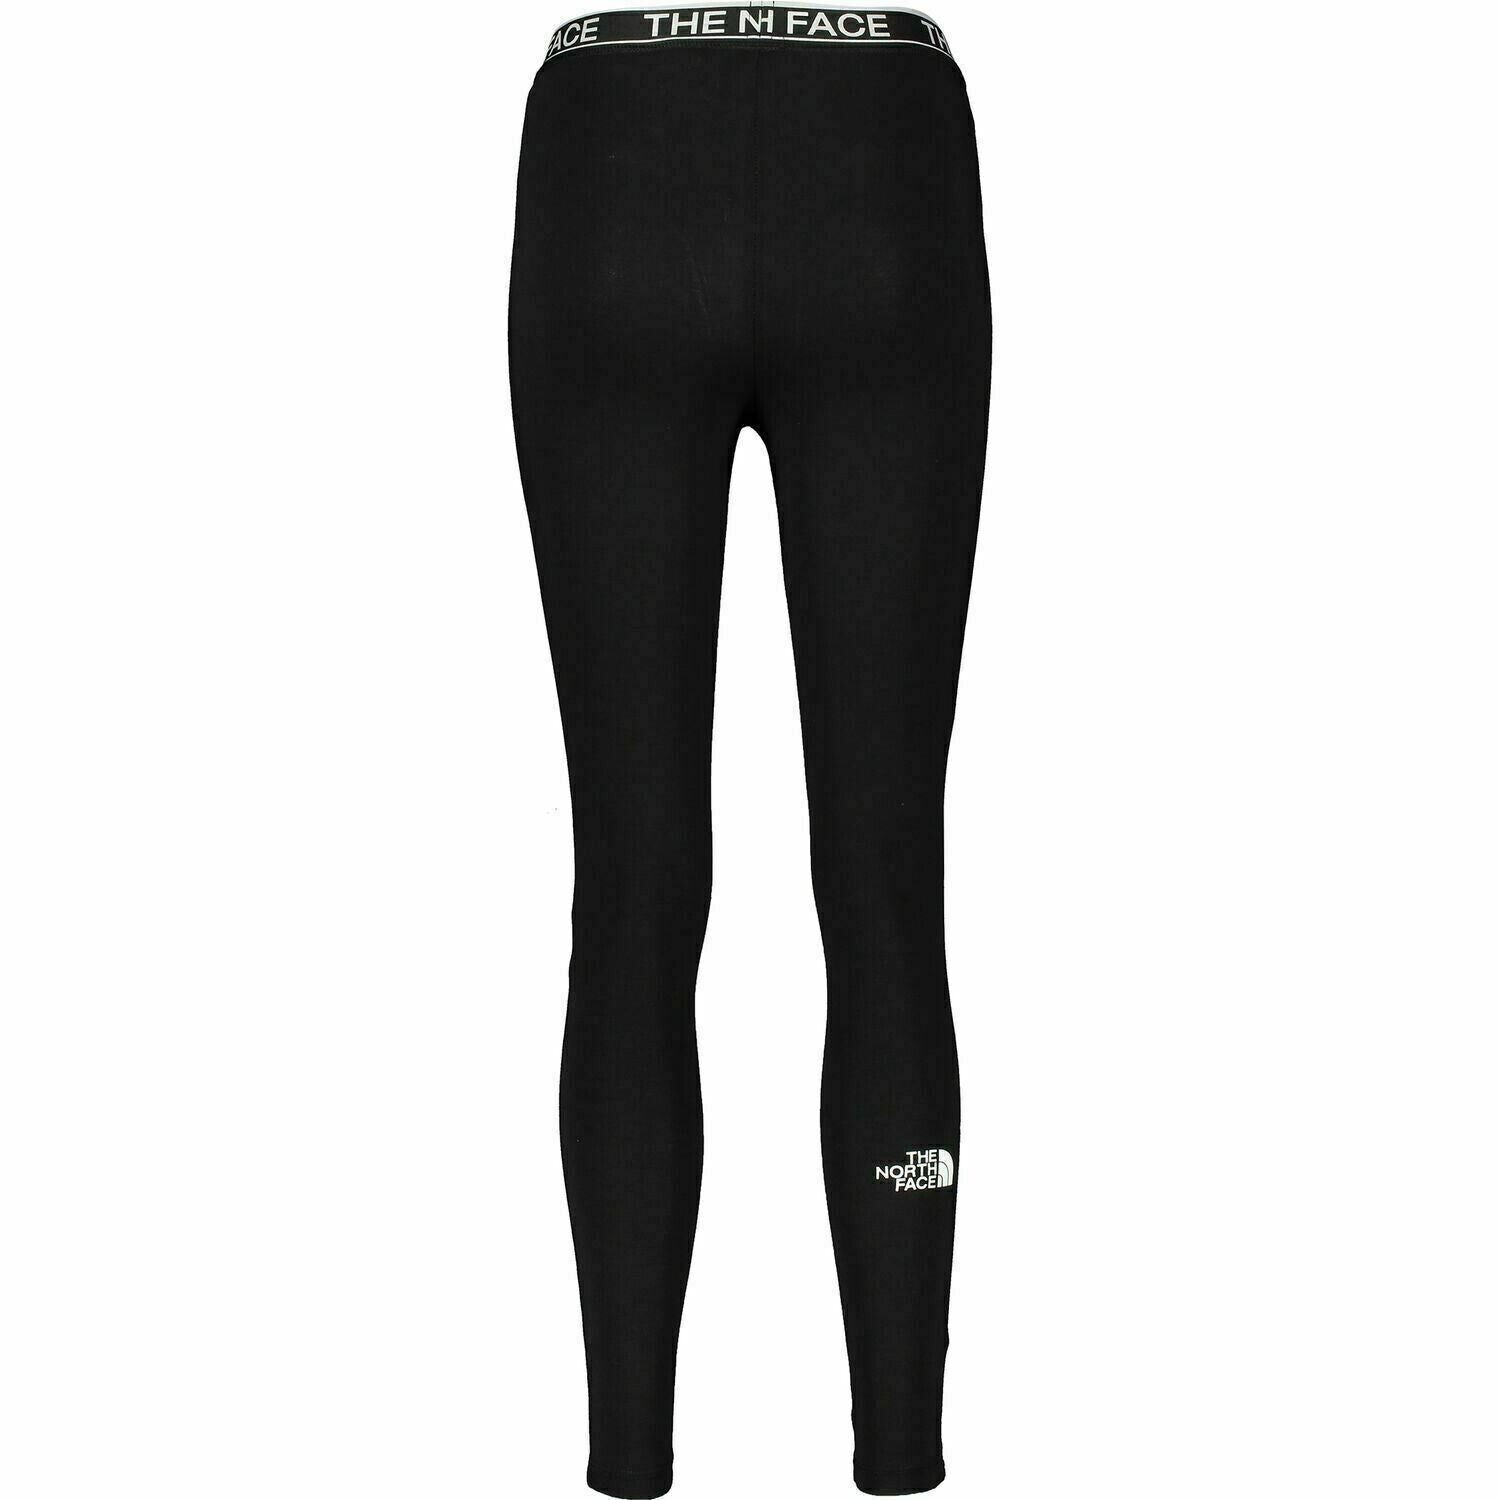 THE NORTH FACE Womens Black Cotton Jersey Leggings, size XS